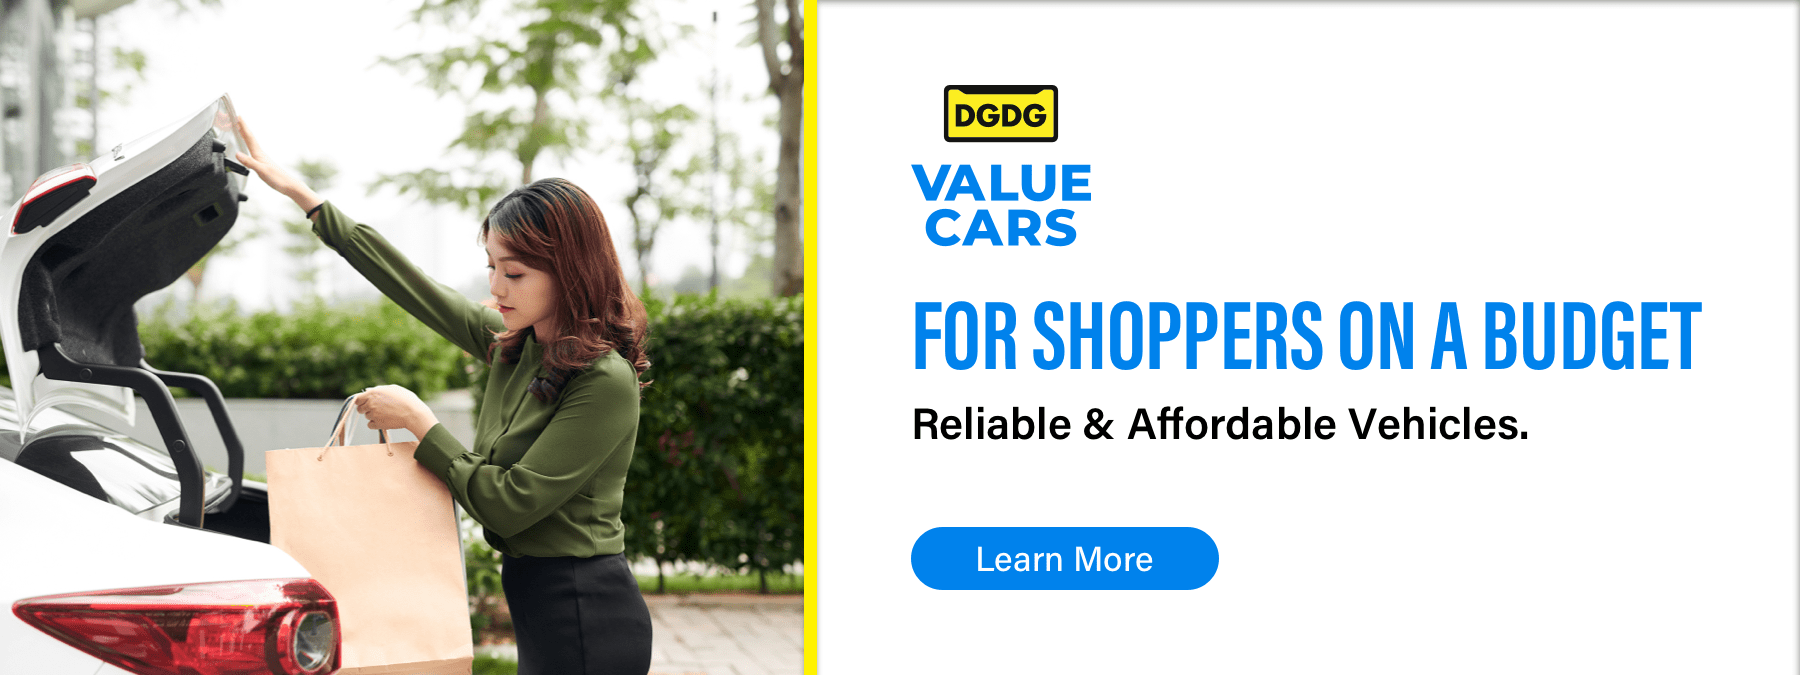 Value Cars, For Shoppers On A Budget, Reliable & Affordable Vehicles., Learn More